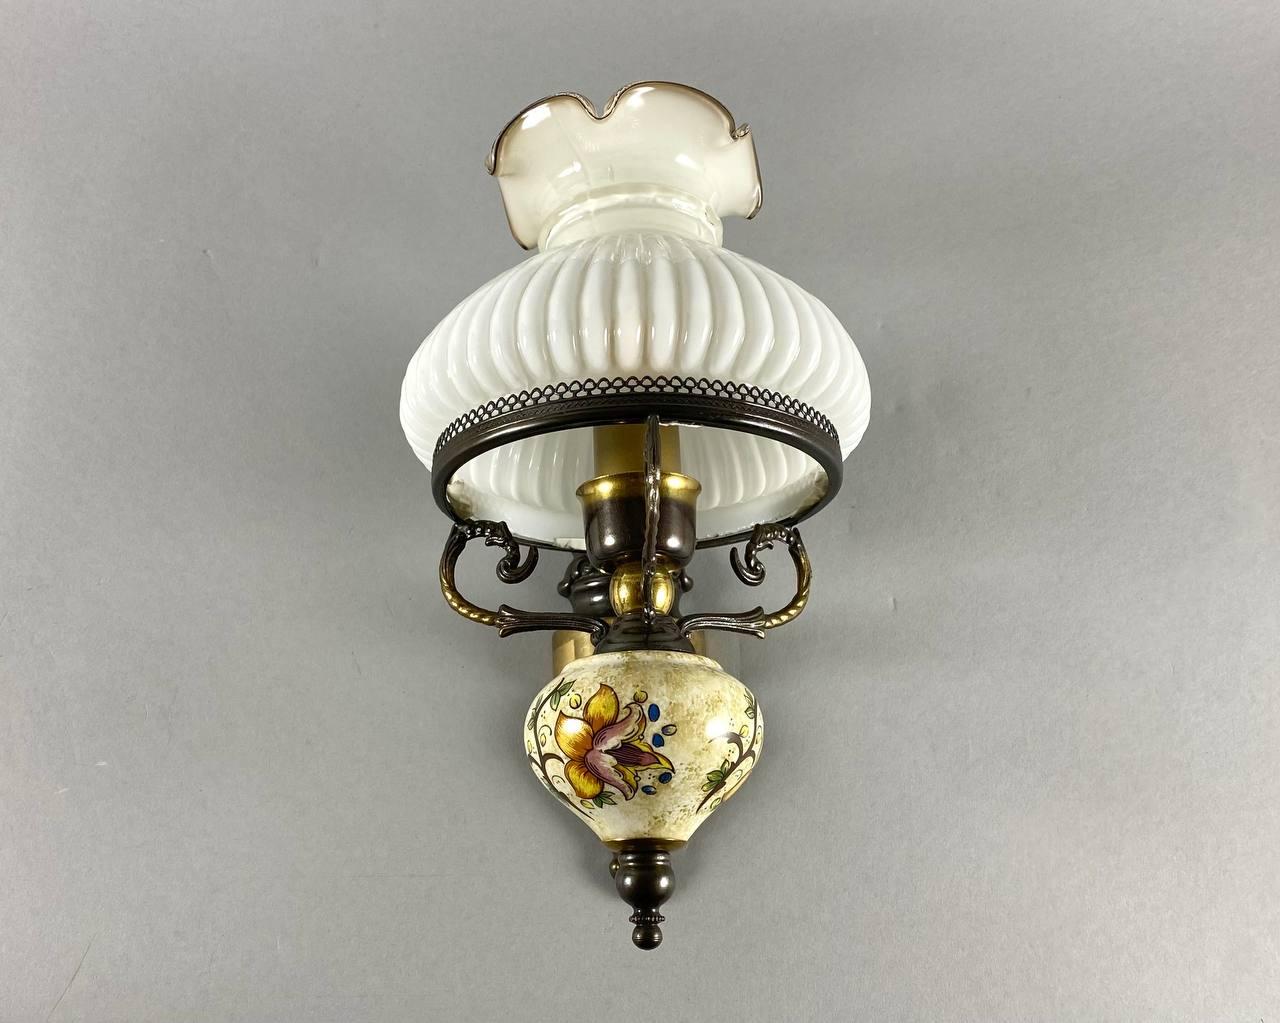 Brass Vintage Wall Sconce with Milk Glass Shade by Neukro Menden, Germany